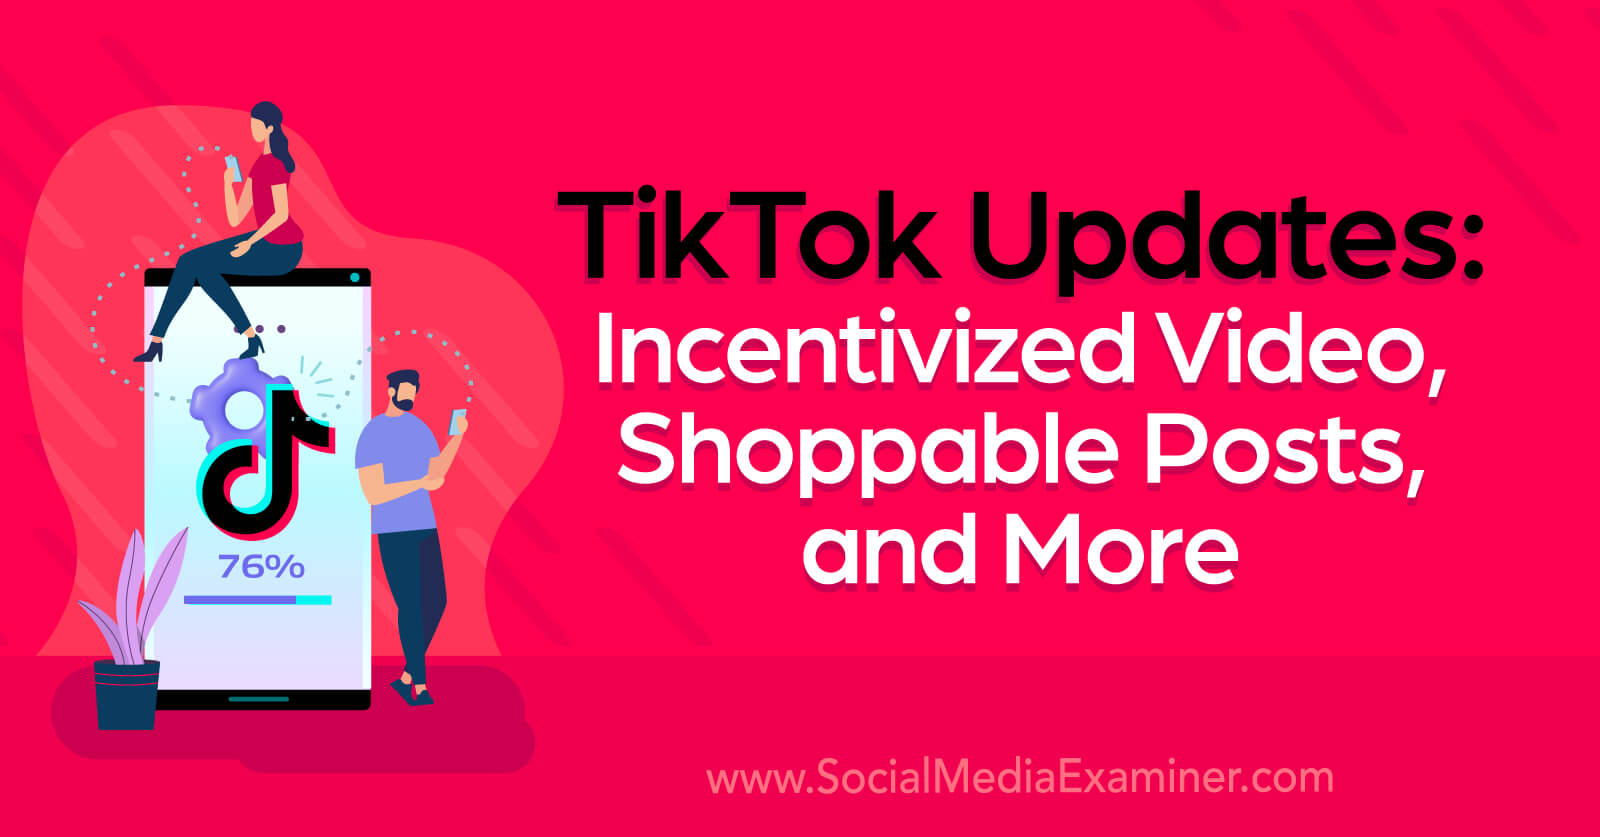 TikTok Updates: Incentivized Video, Shoppable Posts, and More by Social Media Examiner